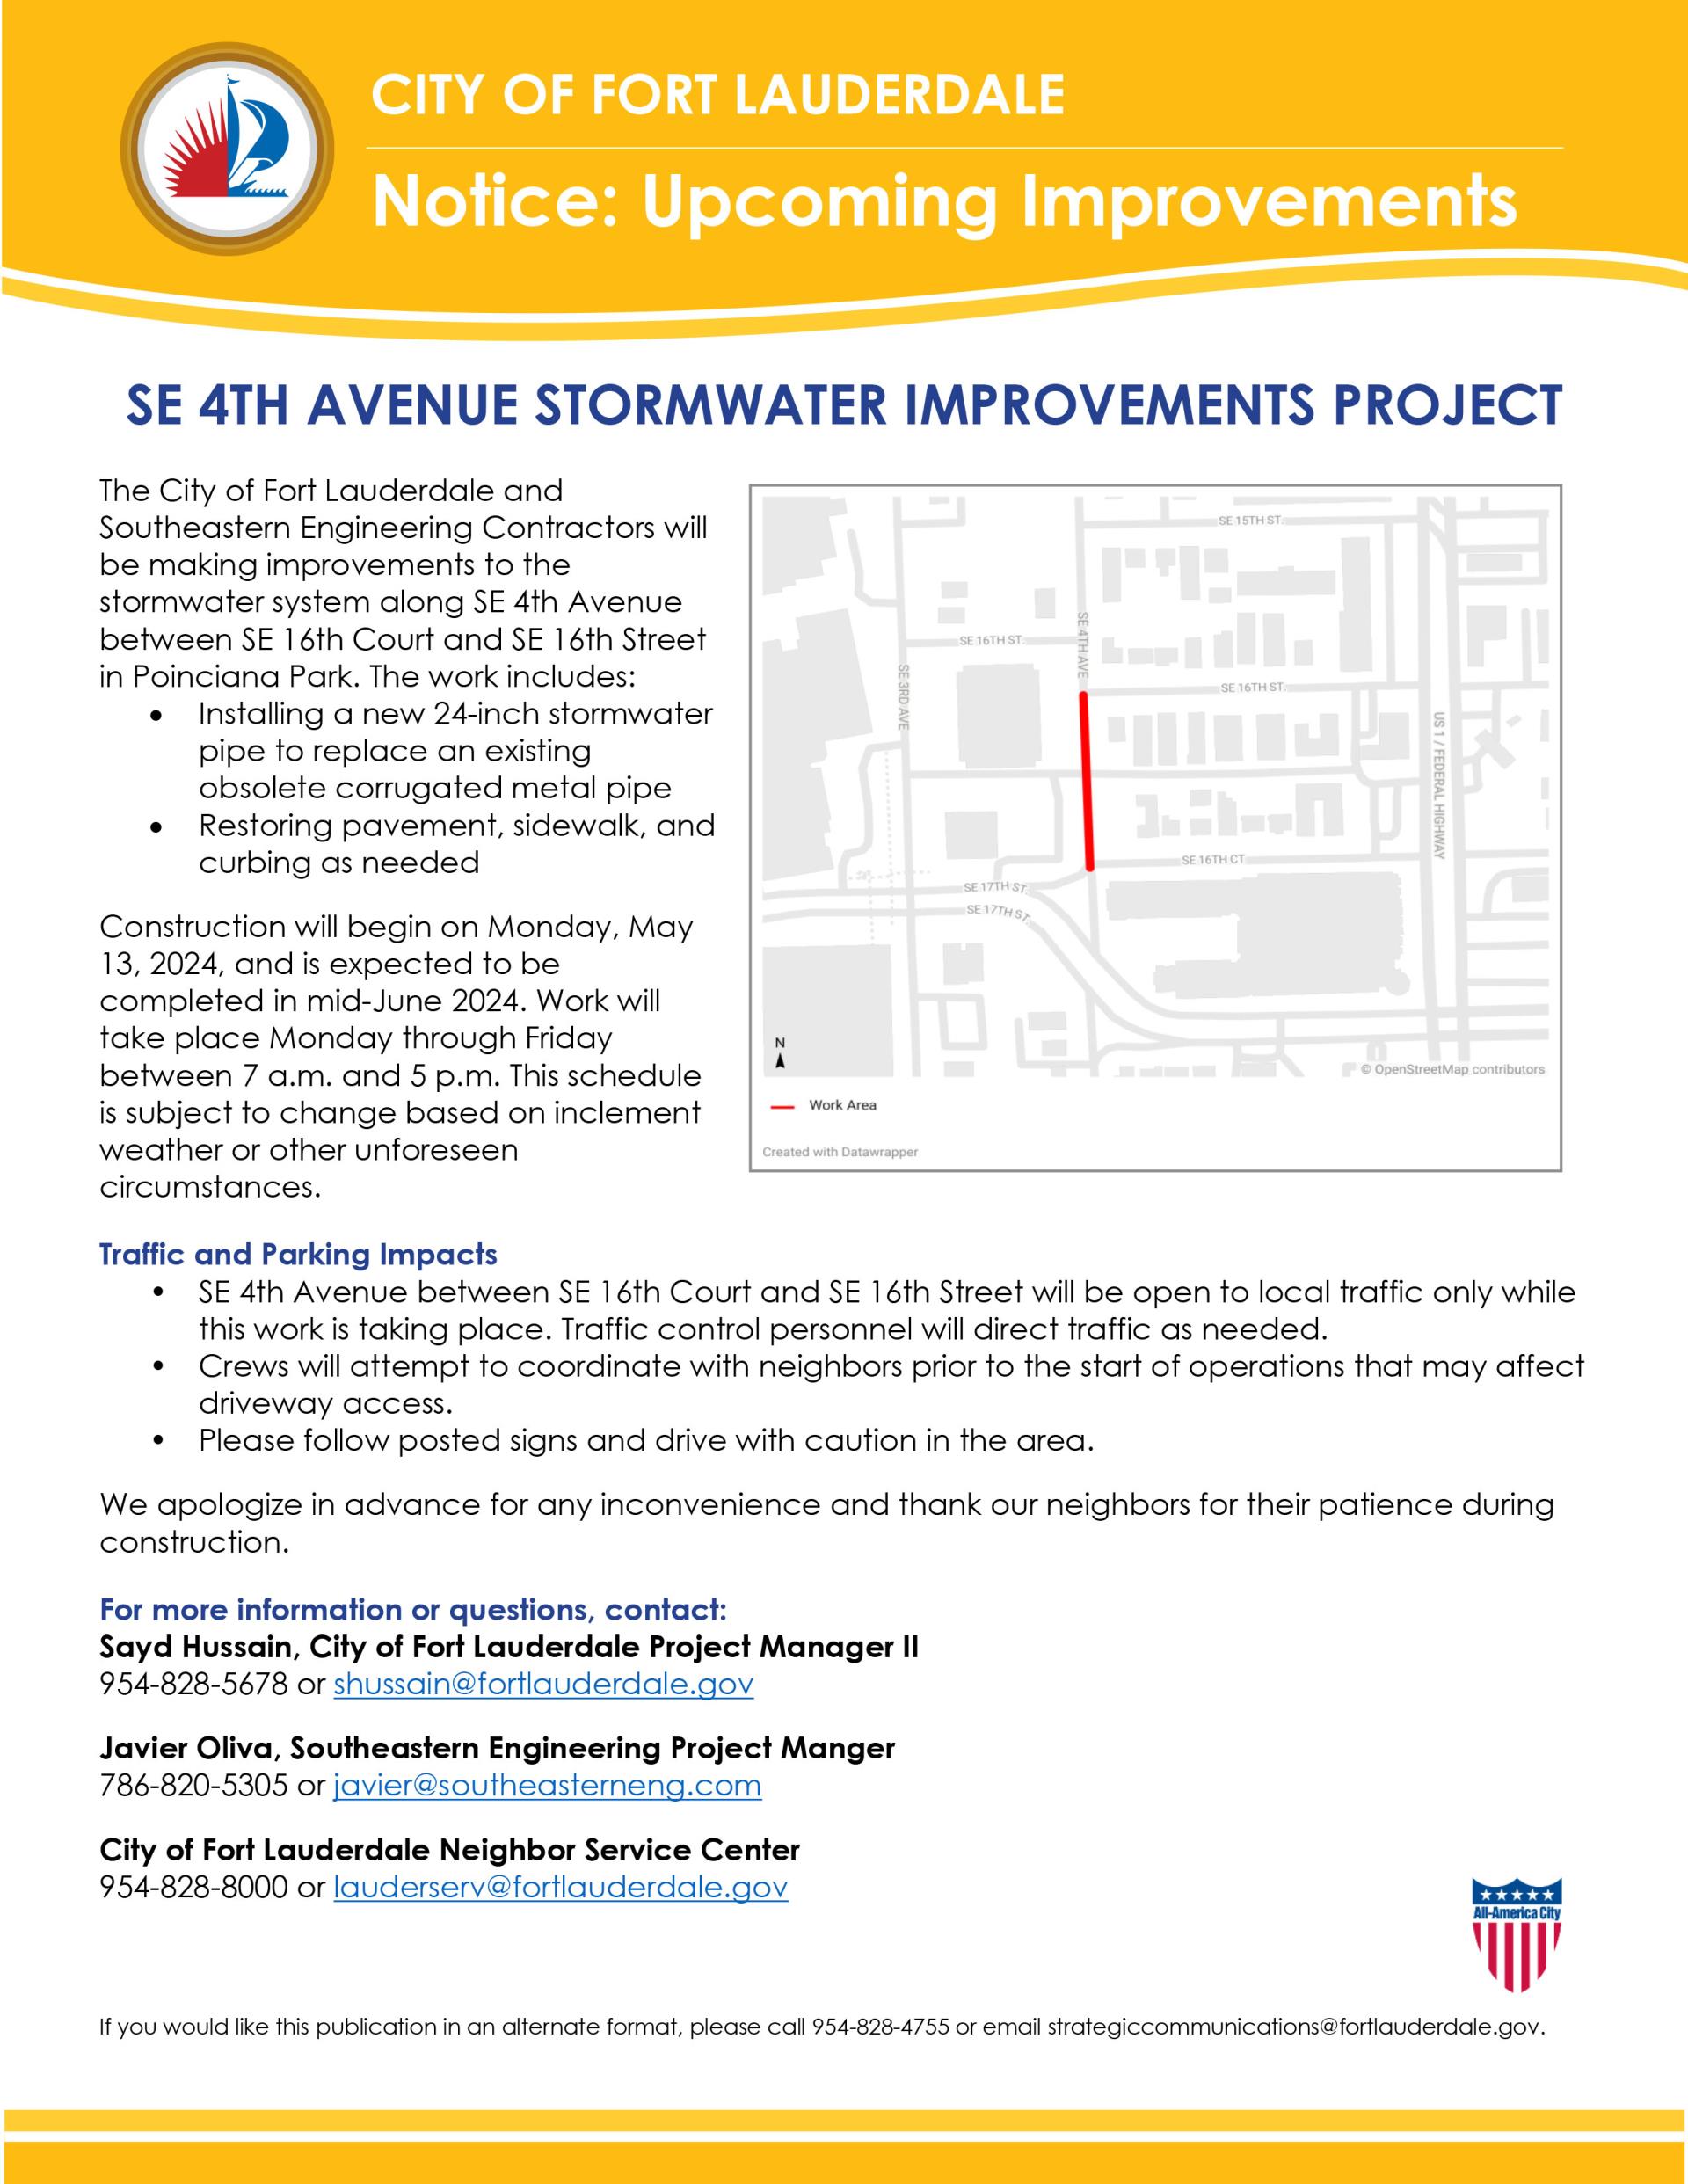 SE-4th-Avenue-Stormwater-Improvements-Project